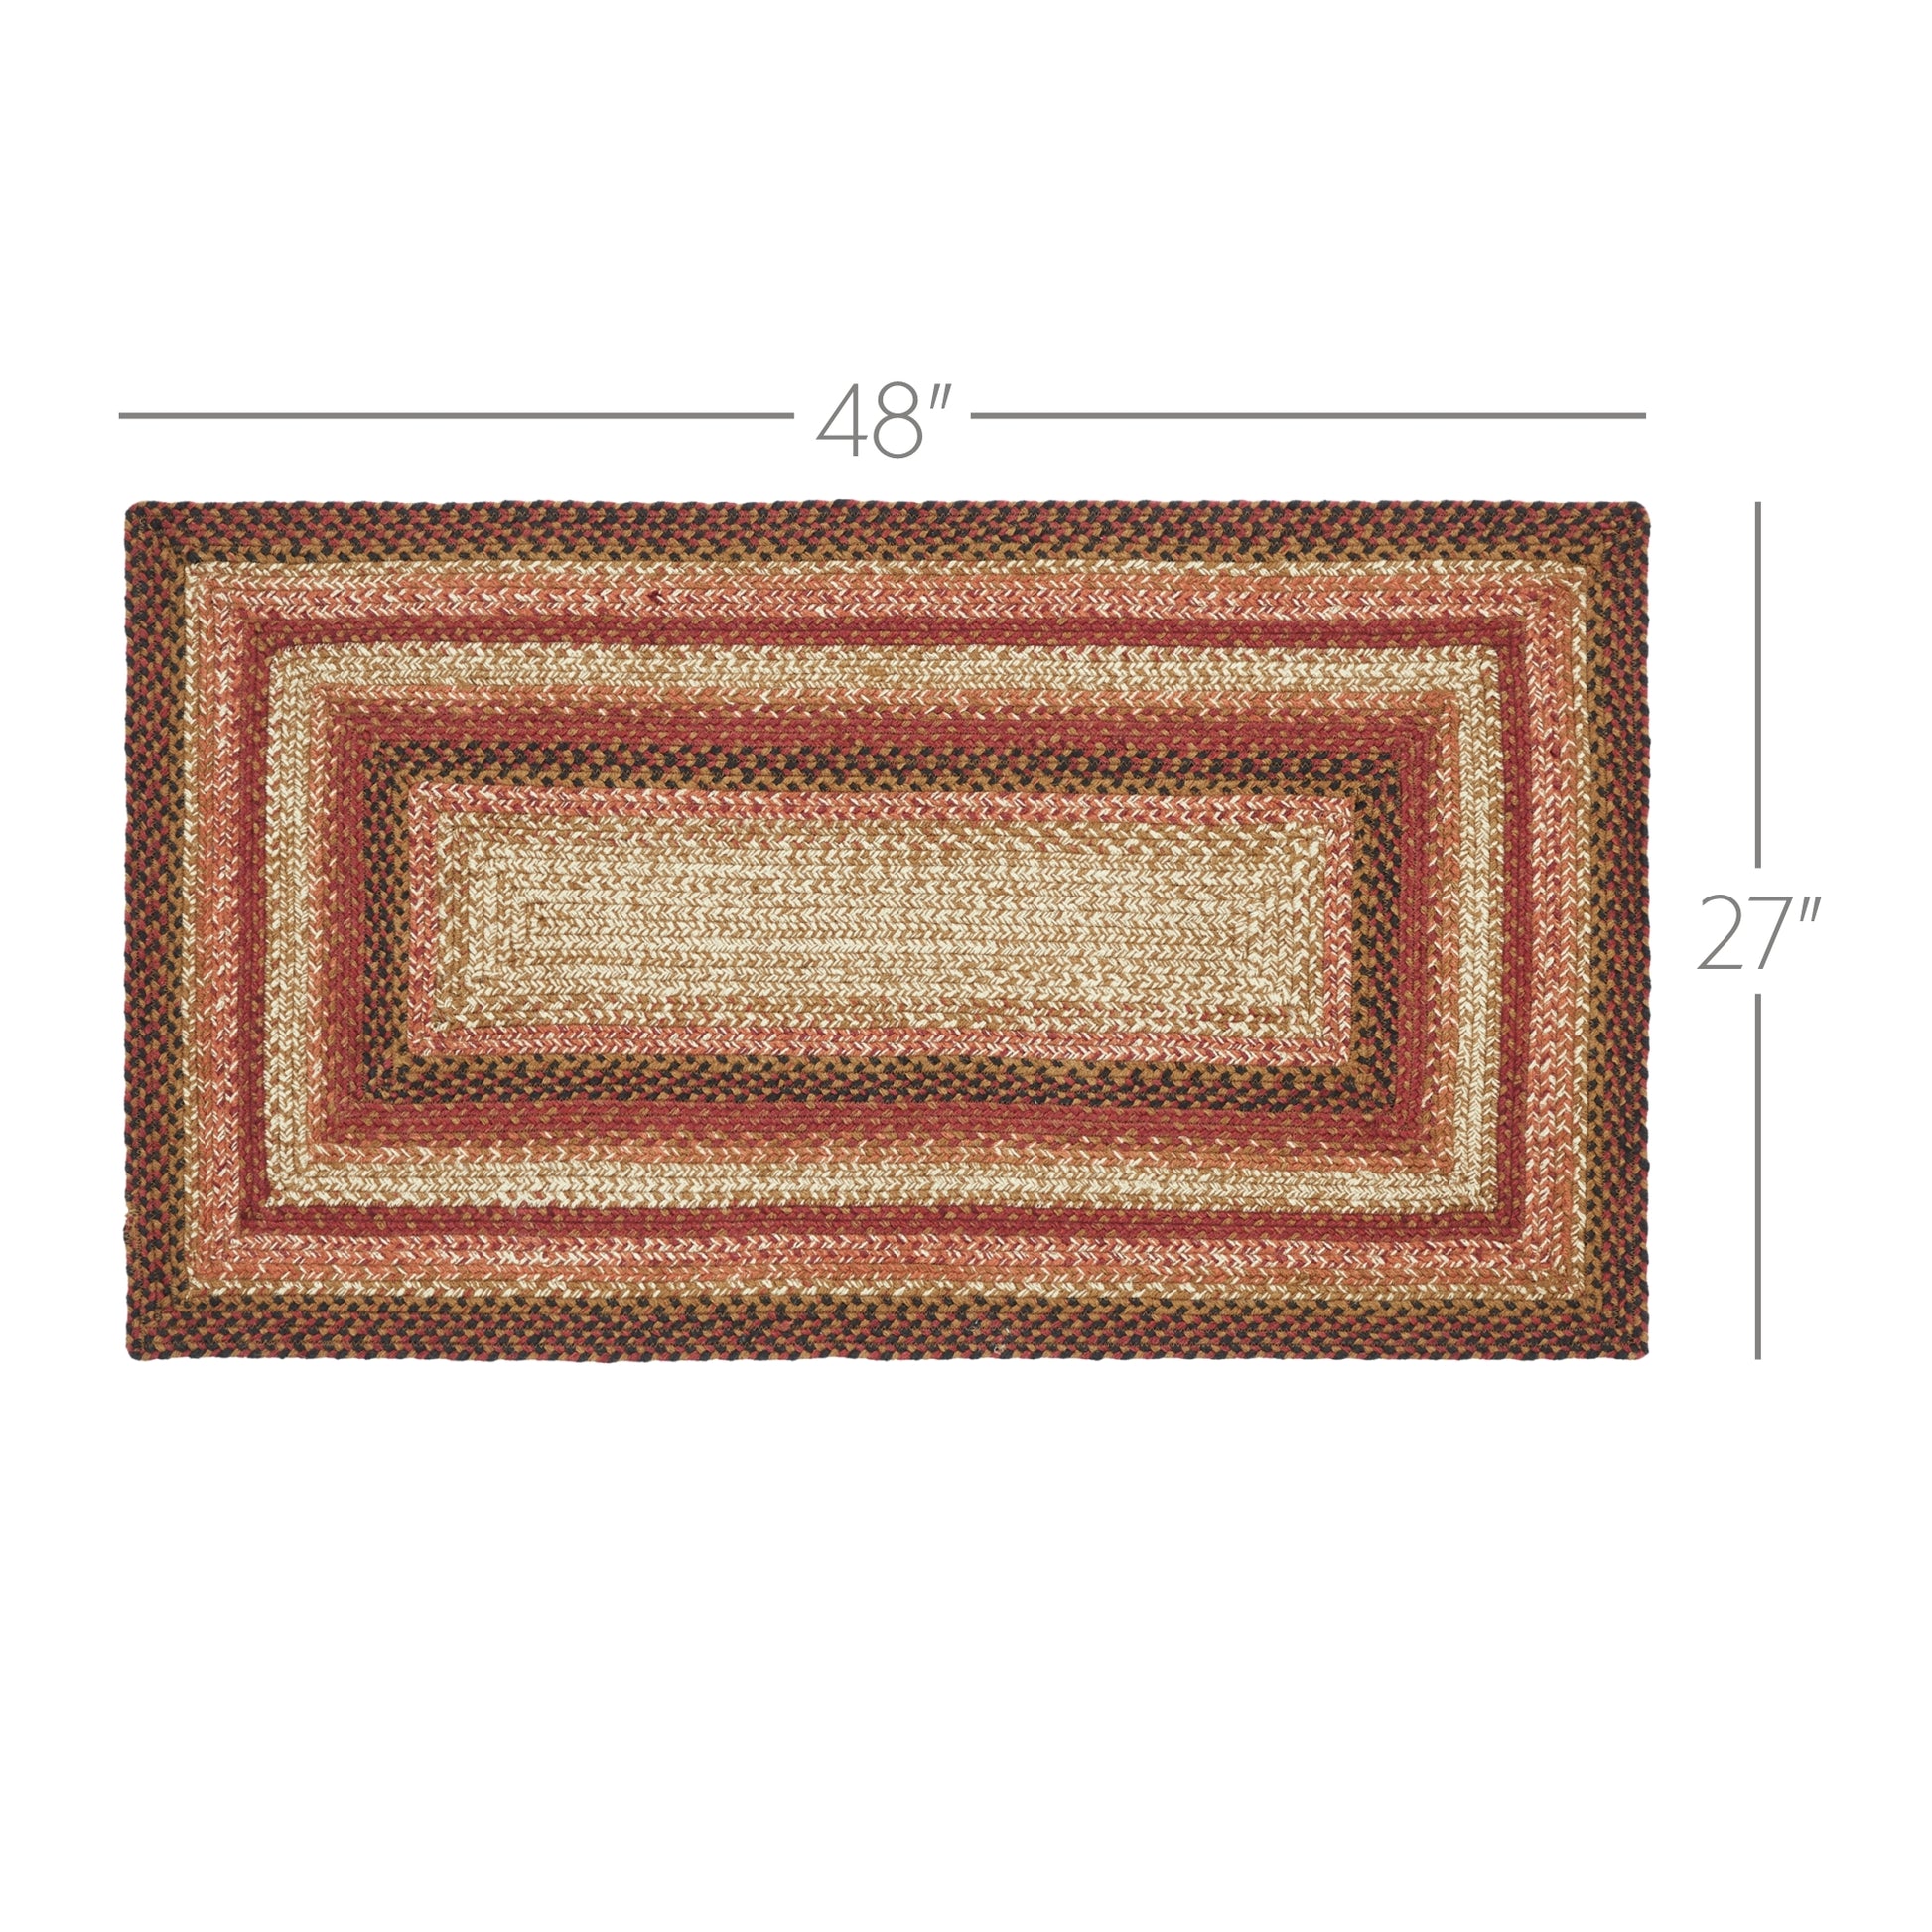 67118-Ginger-Spice-Jute-Rug-Rect-w-Pad-27x48-image-3